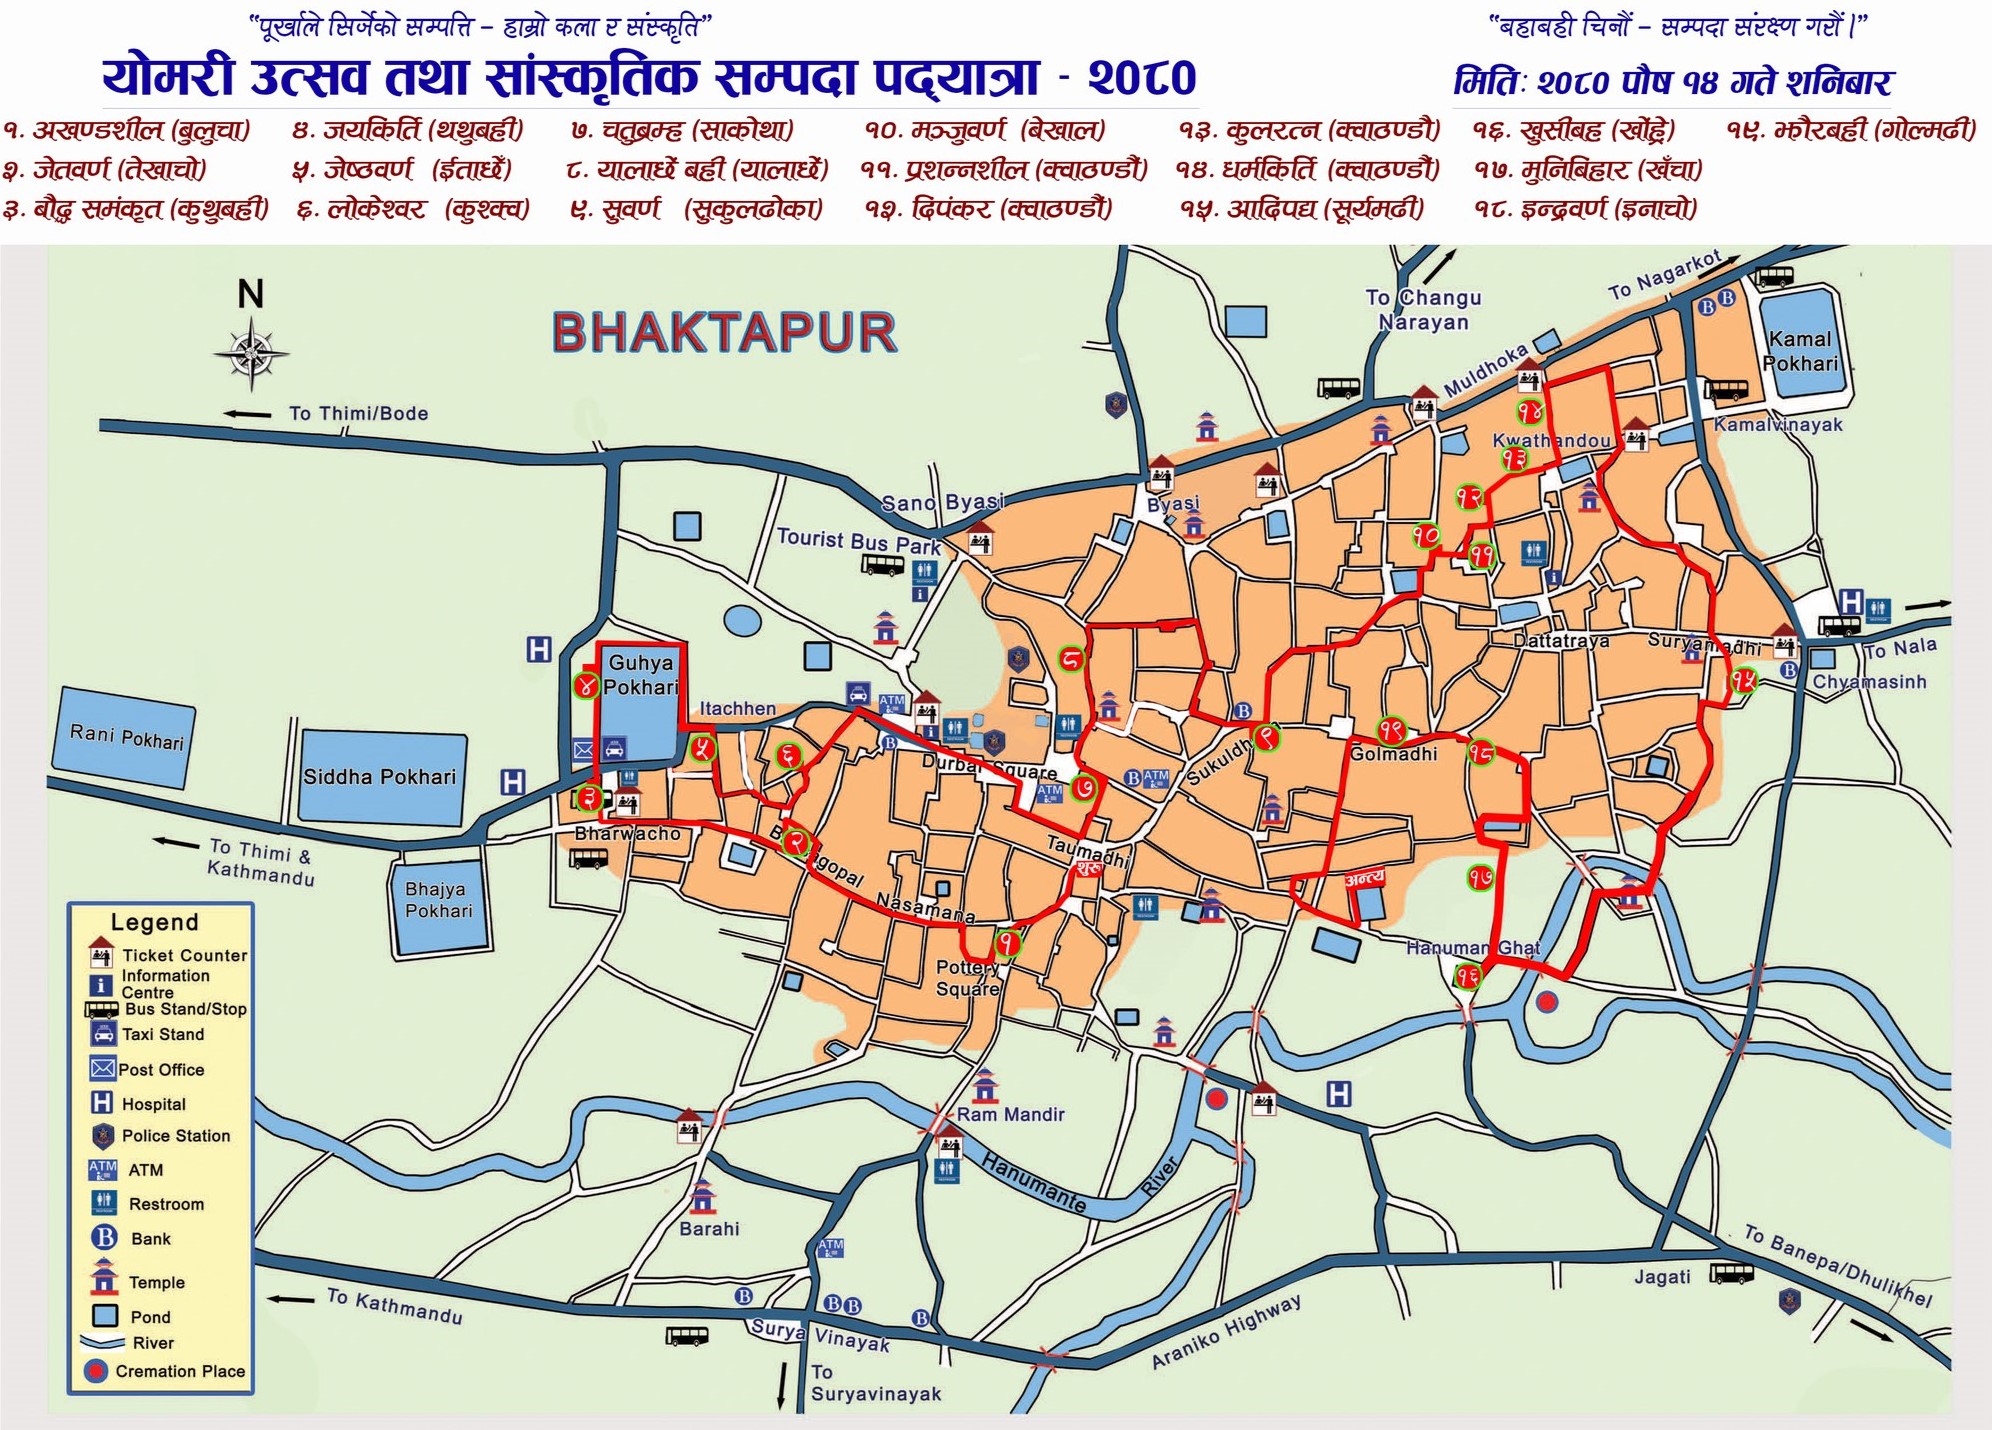 The route for heritage walk. Image Courtesy: Bhaktapur Municipality/ Facebook